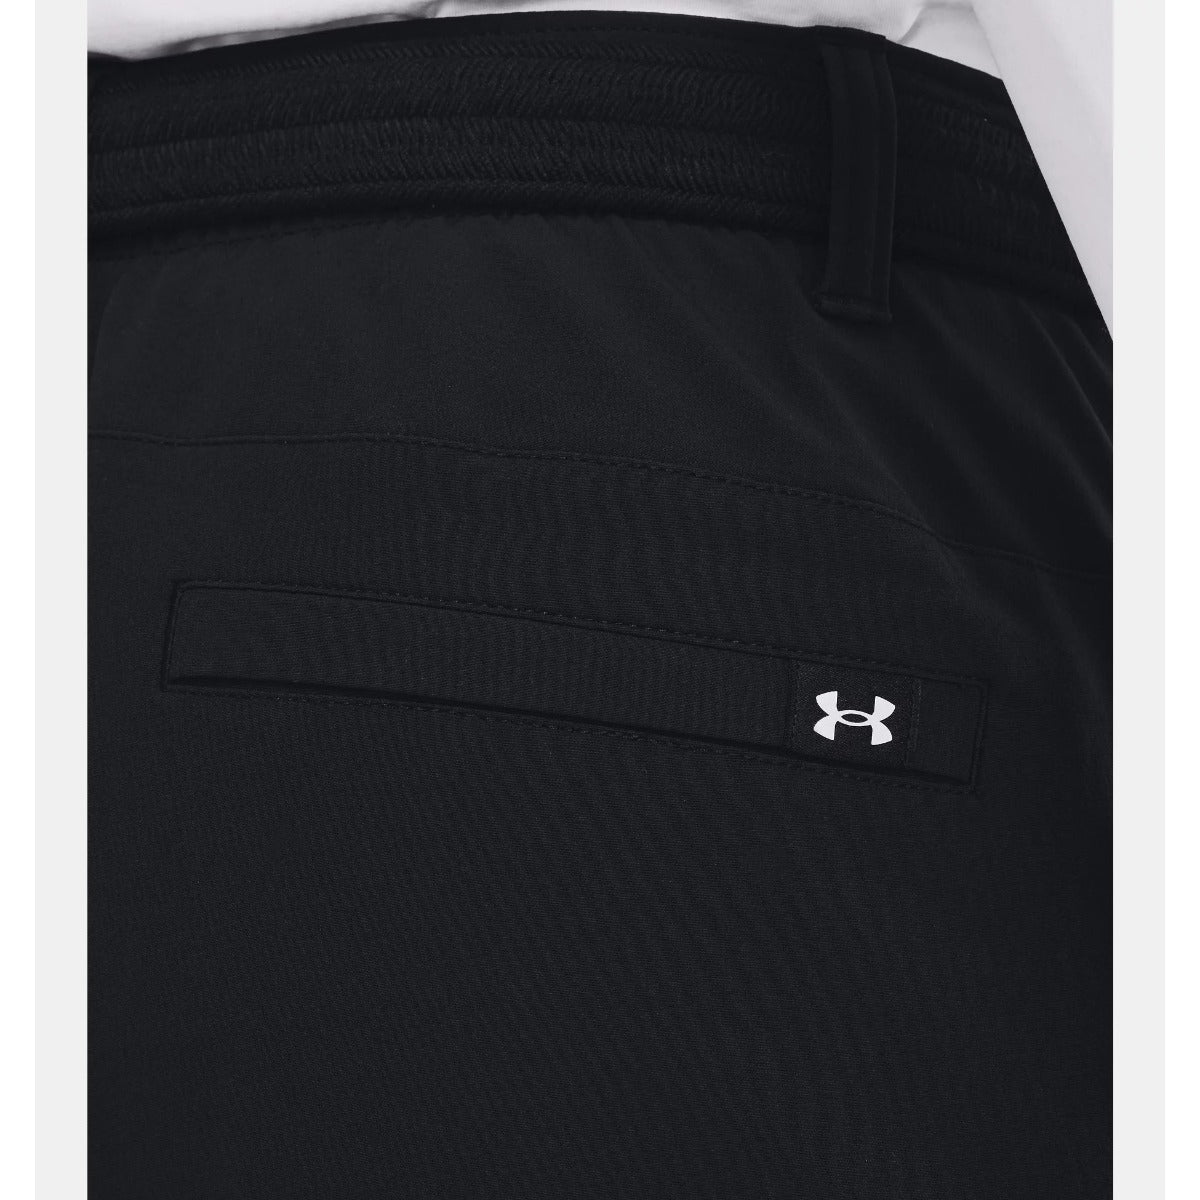 UNDER ARMOUR COLDGEAR INFRARED GOLF TROUSERS MENS